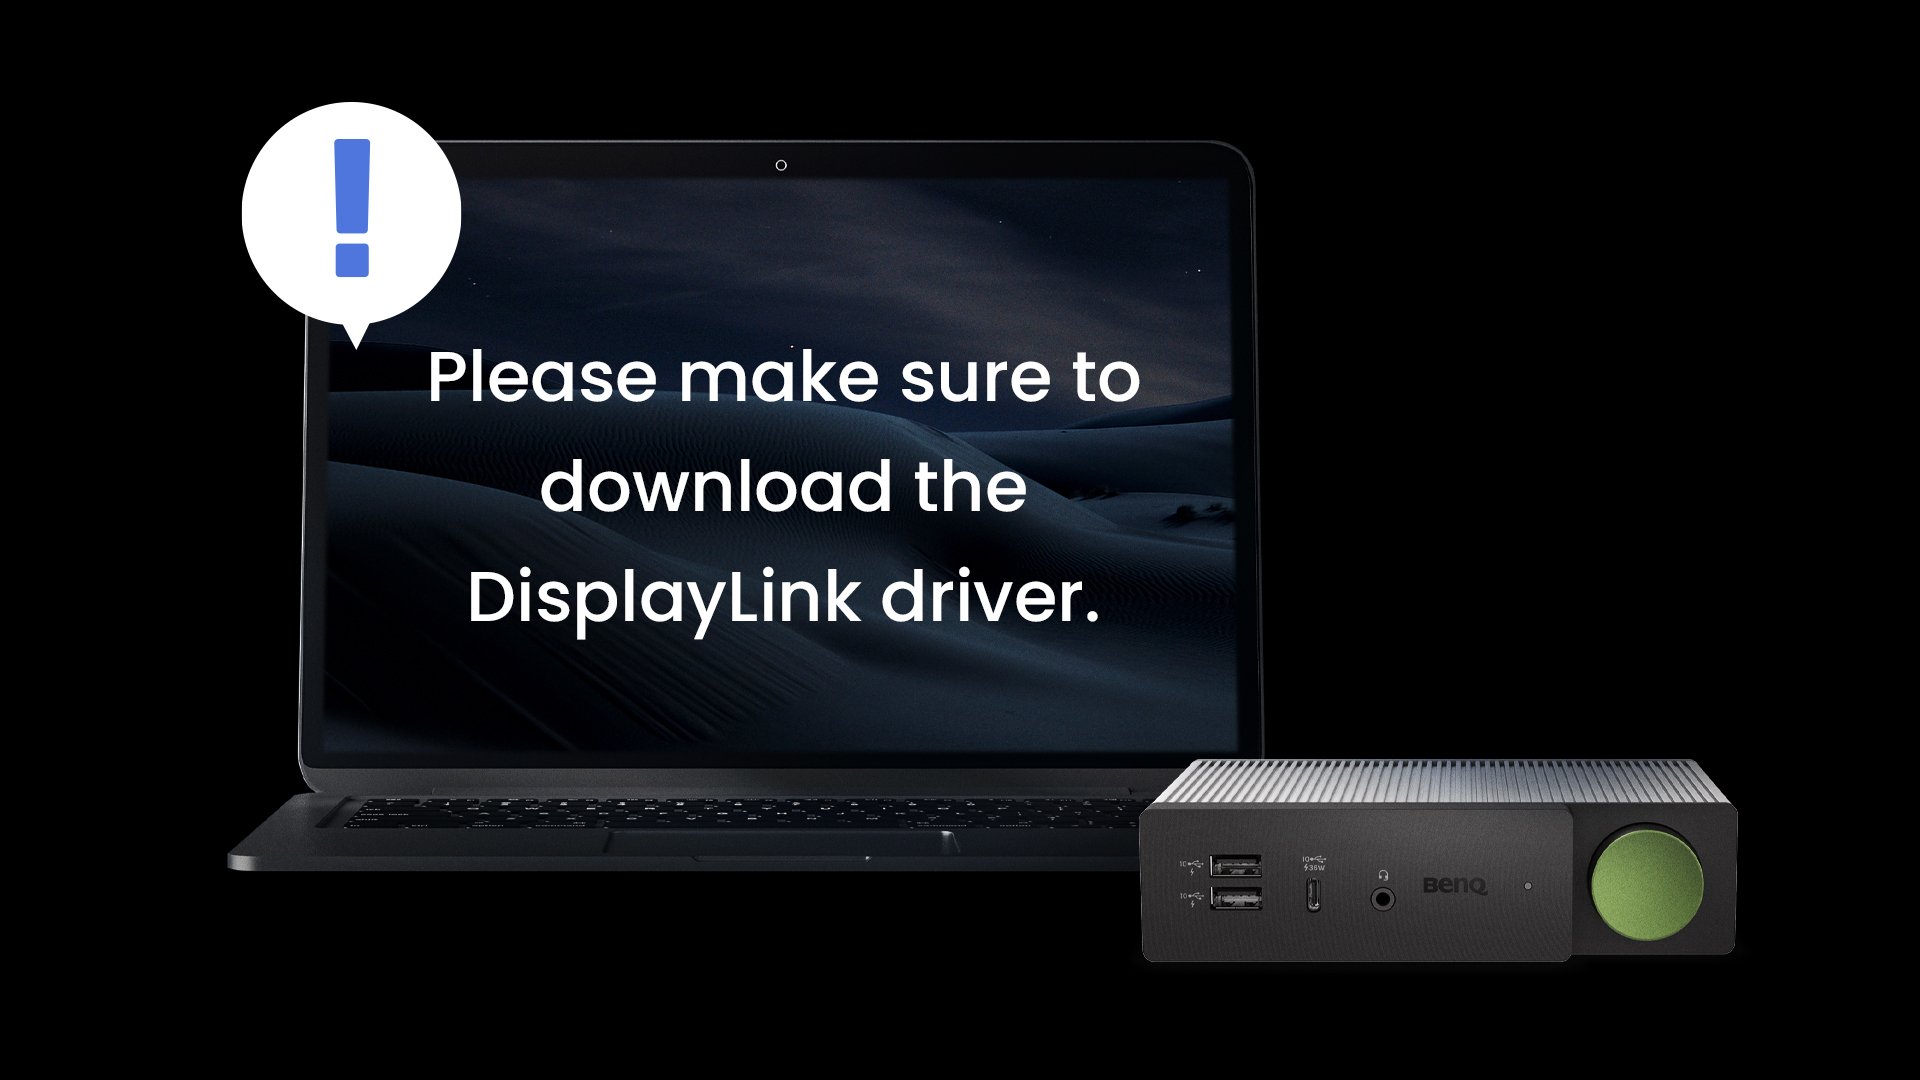 benq dock dp1310 becreatus supports displaylink but does not support hdcp and make sure to dowload the displaylink driver